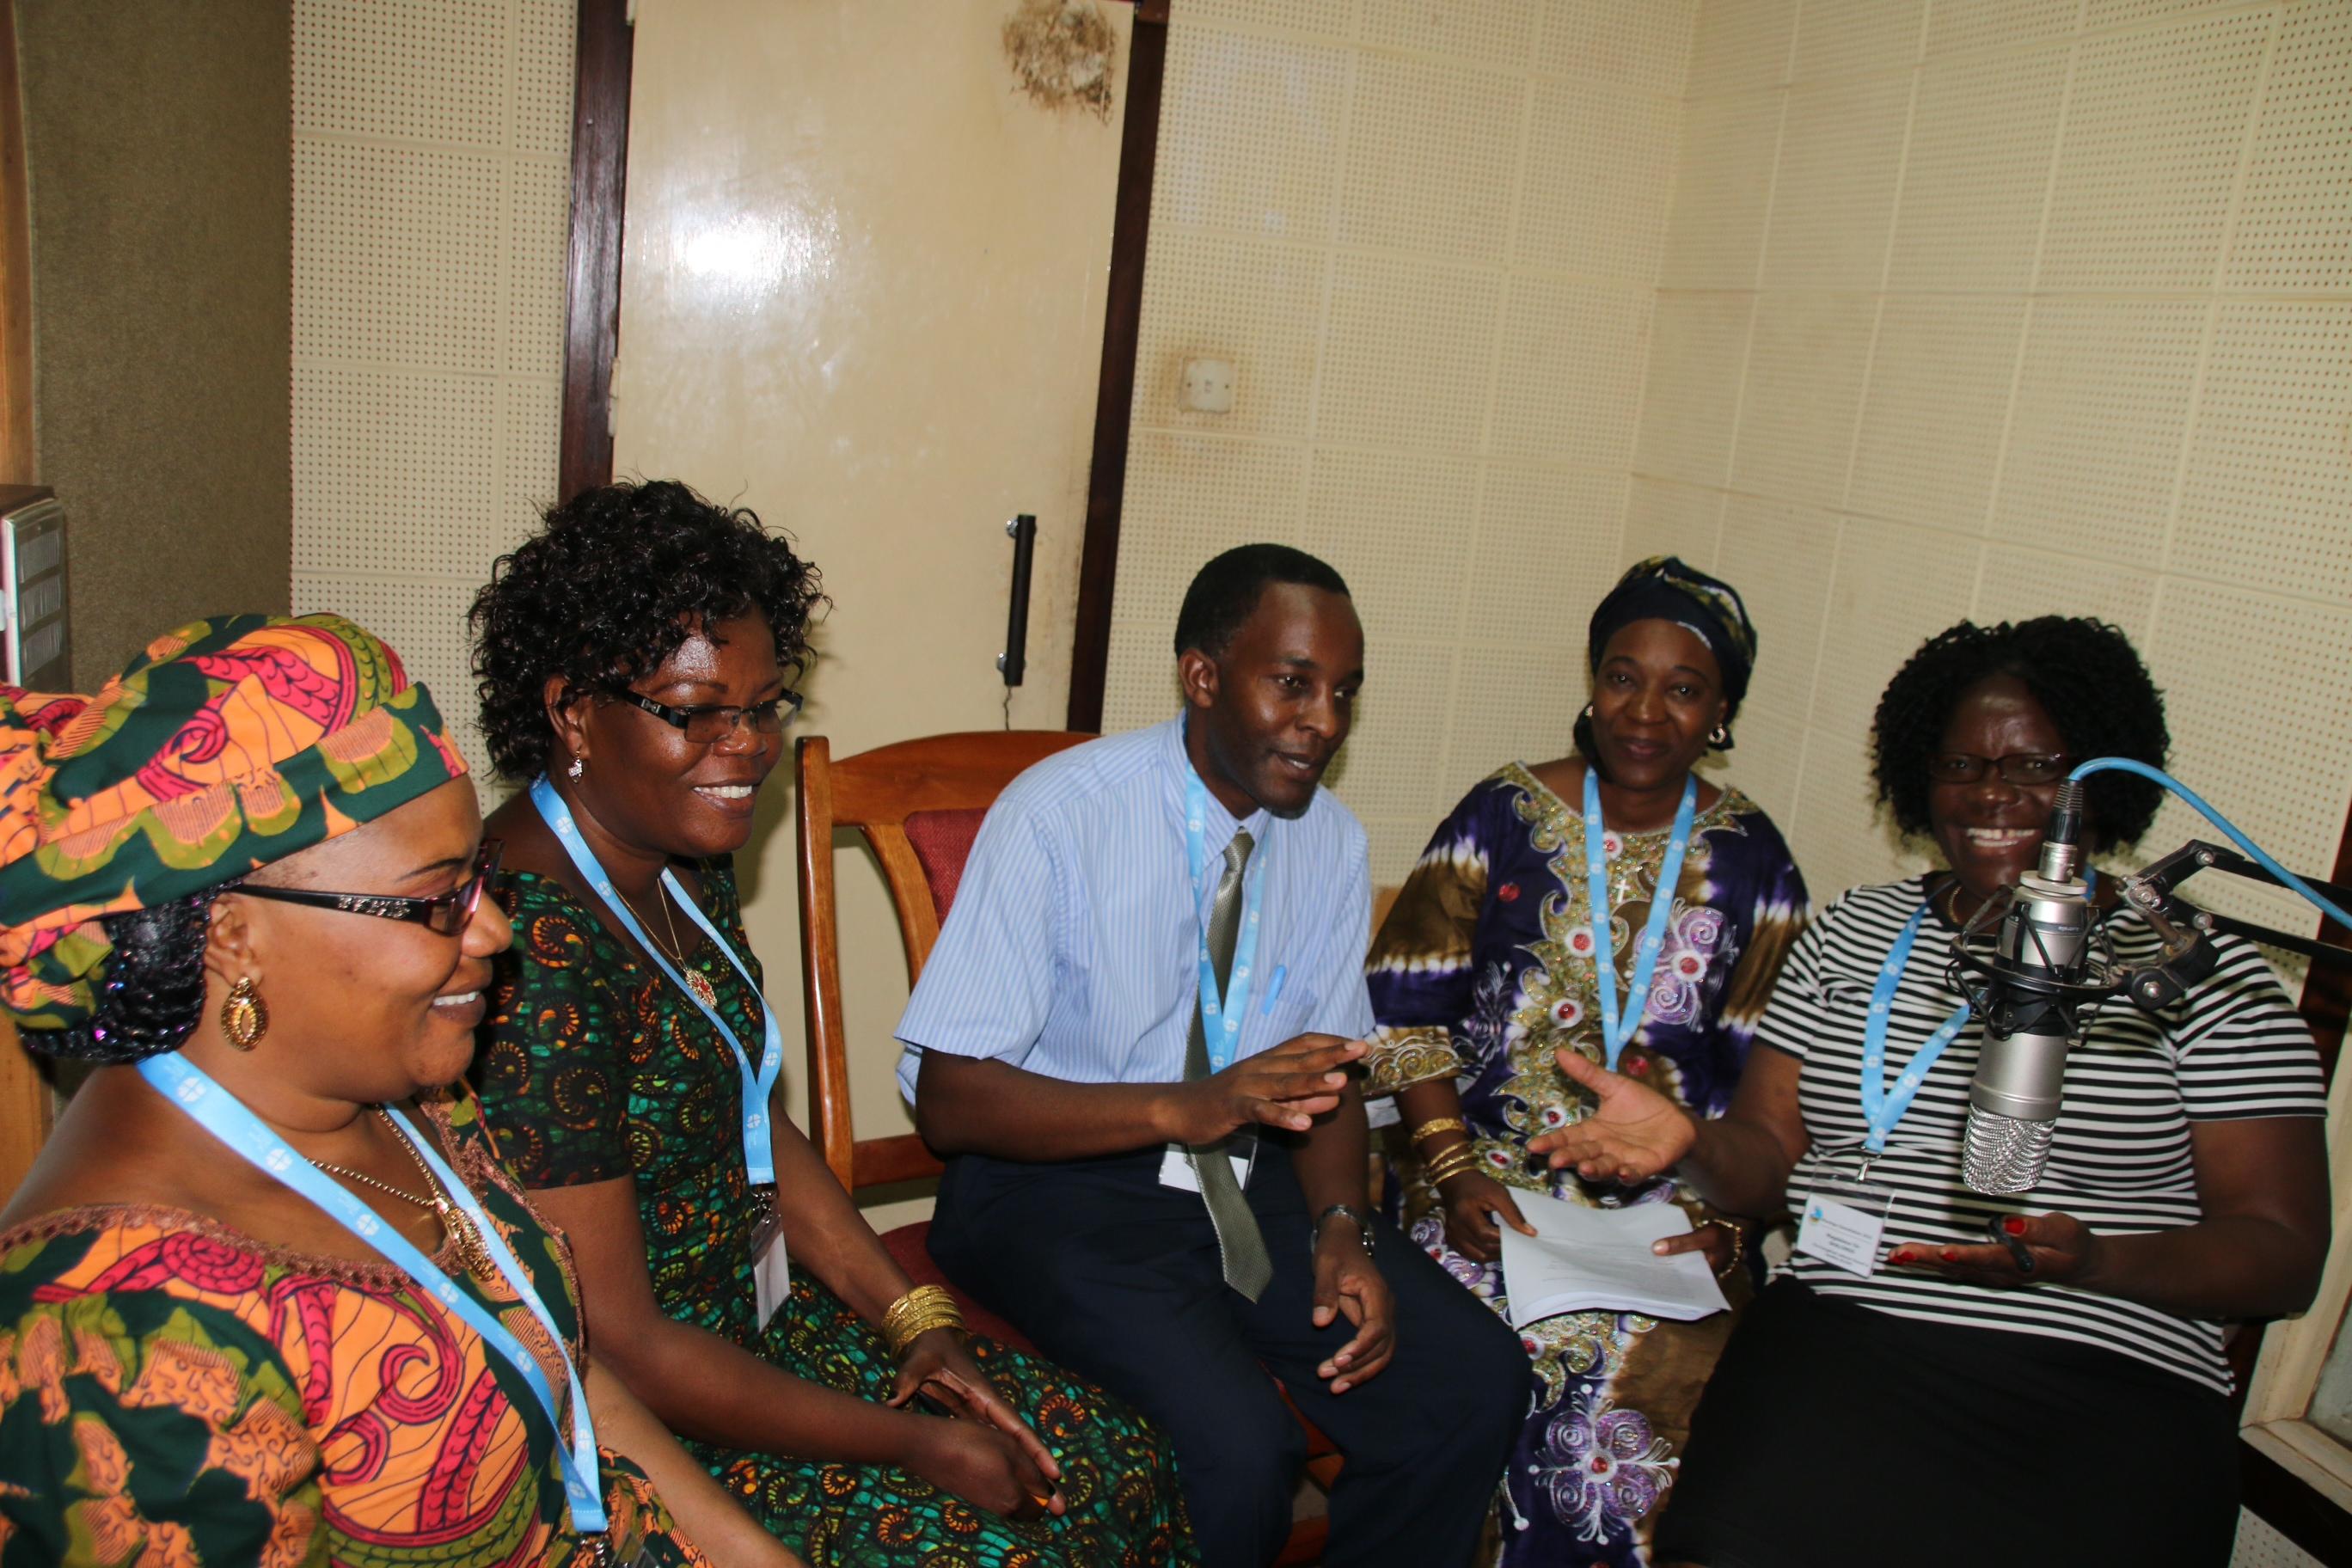 Lutheran women take to the airwaves in Moshi, Tanzania, with a message that women's rights must be upheld. Photo: LWF/Tsion Alemayehu